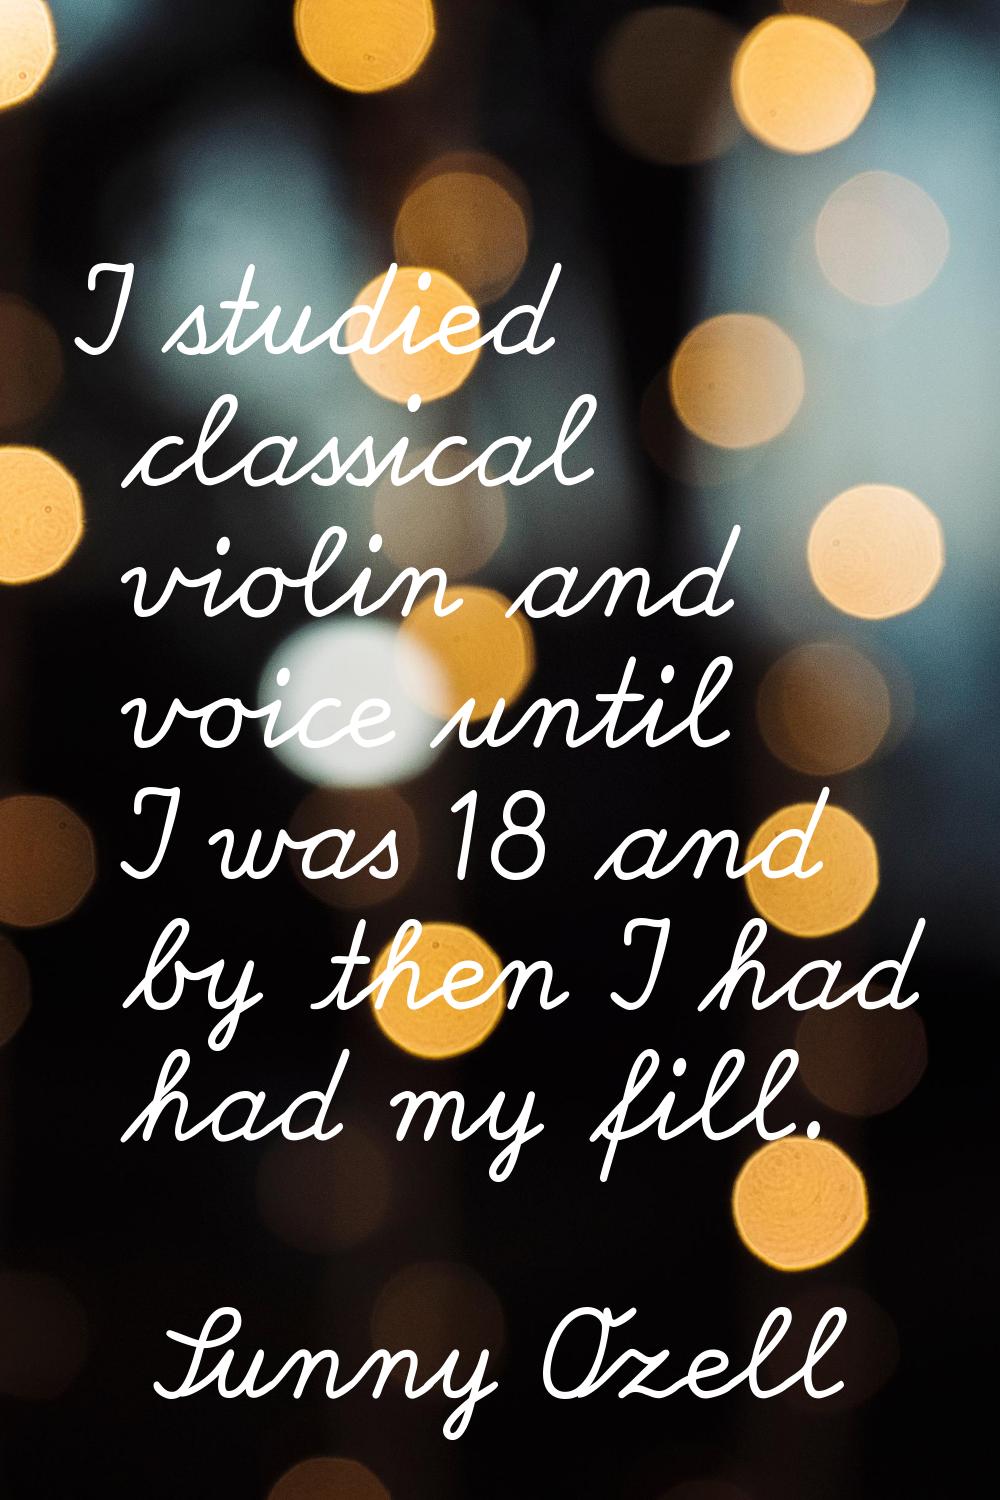 I studied classical violin and voice until I was 18 and by then I had had my fill.